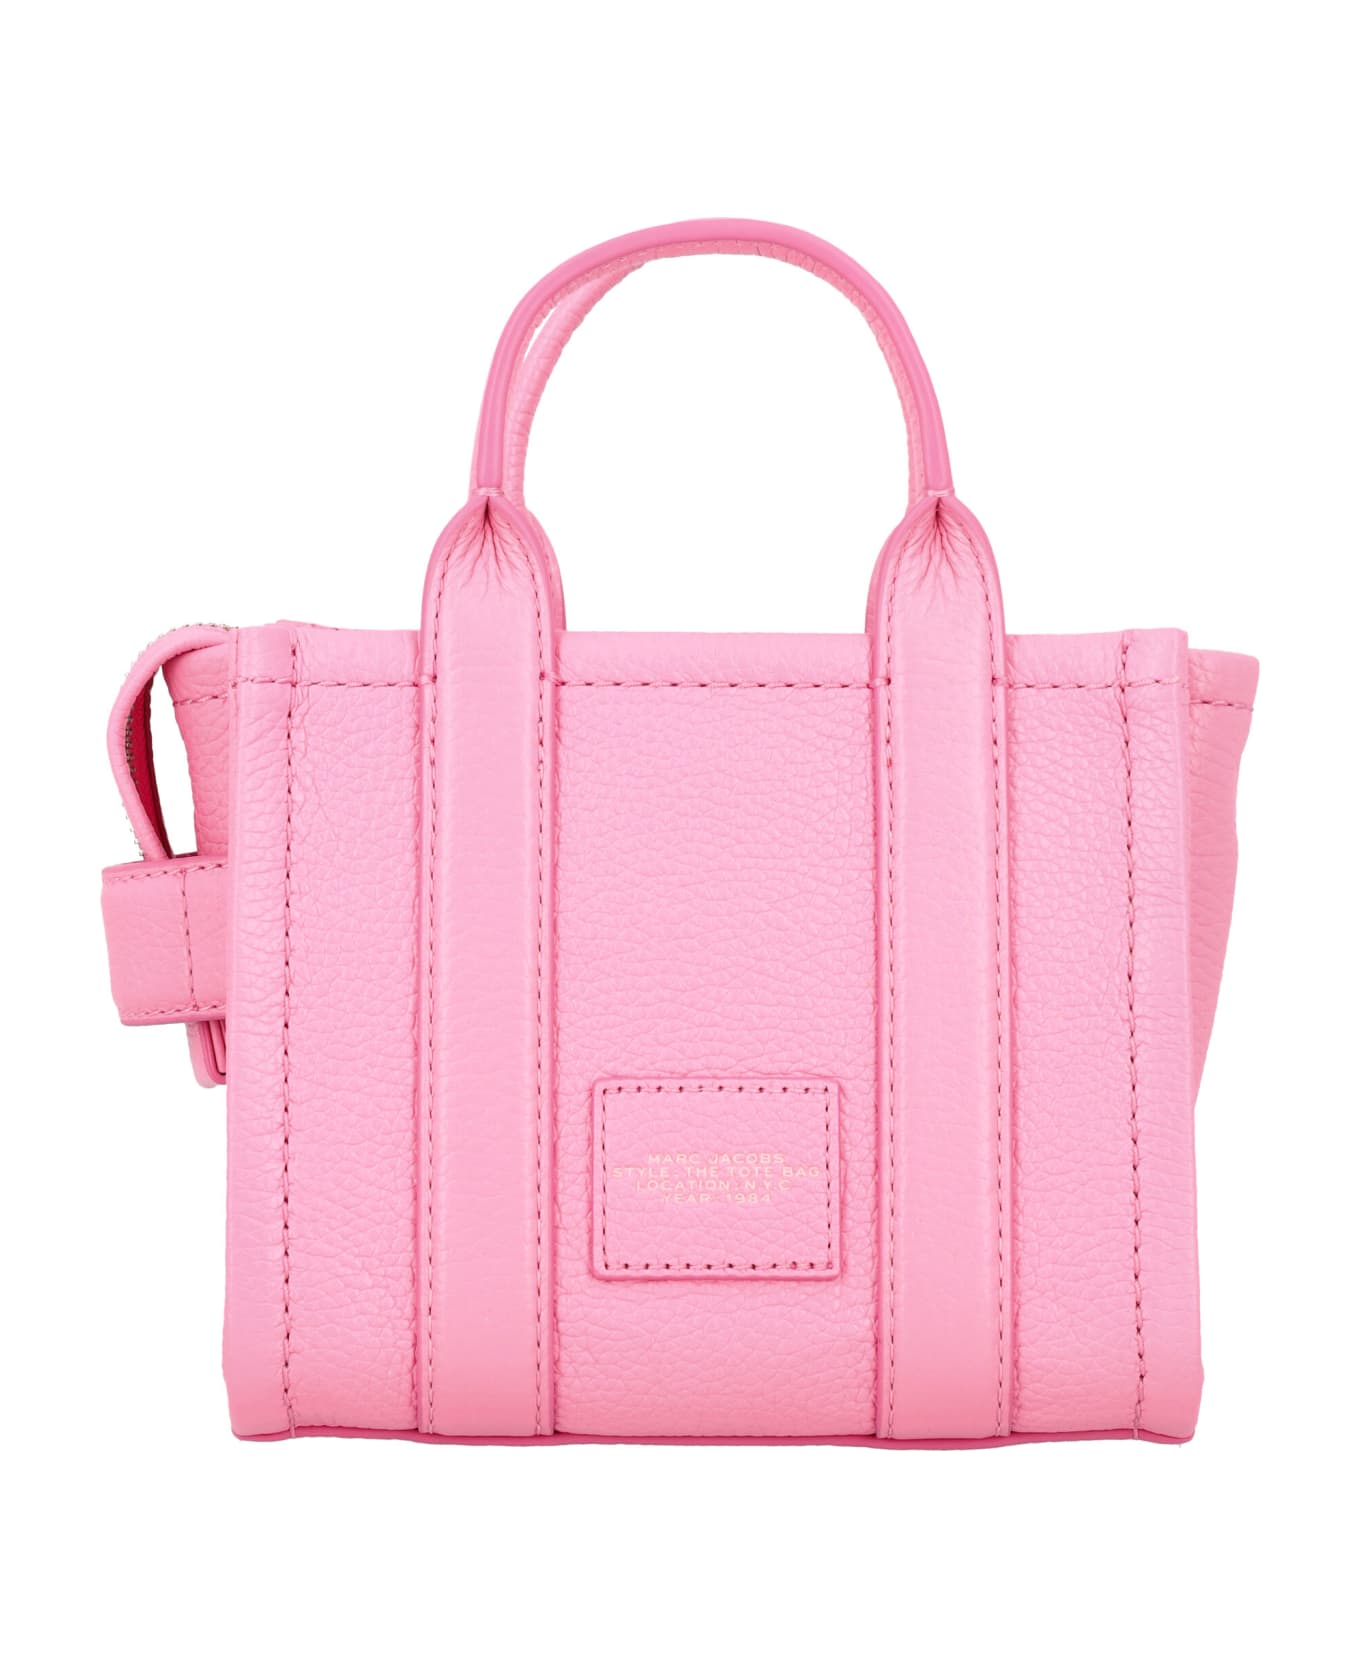 Marc Jacobs The Mini Tote Leather Bag - PETAL PINK